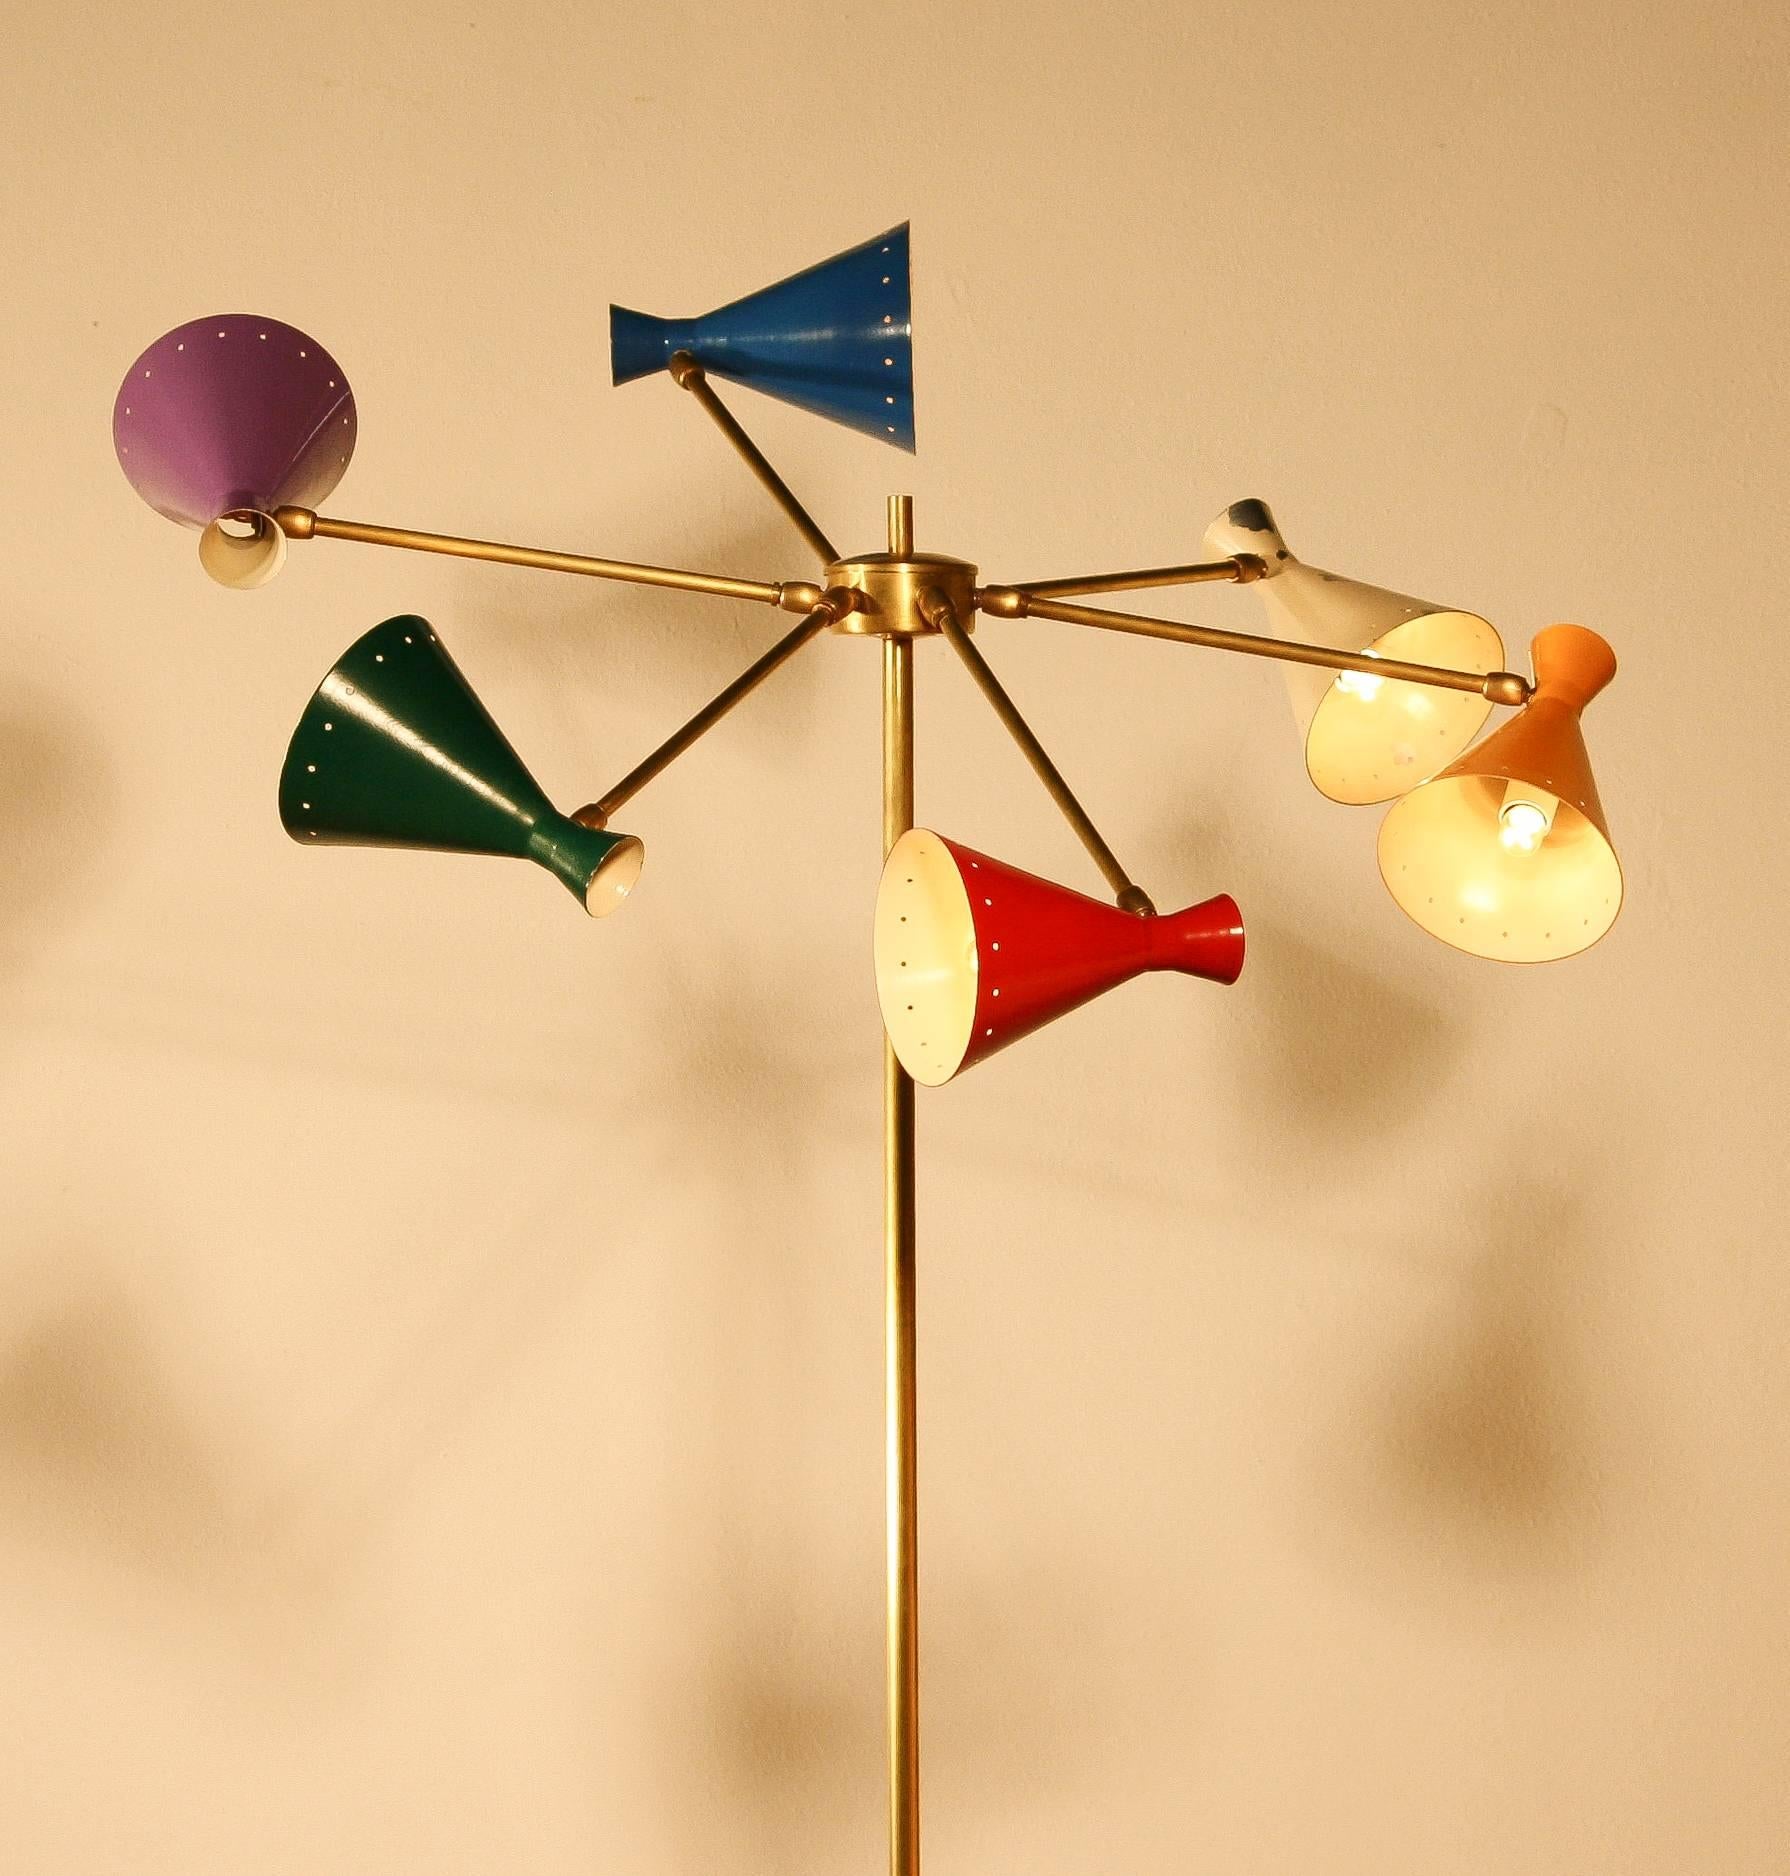 Beautiful floor lamp with six colored caps.
Produced by Arteluce in Italy.
The lamp is made of a copper stand on a white marble base with at the top six copper arms with brightly colored metal caps.
For safety we replaced the wiring and